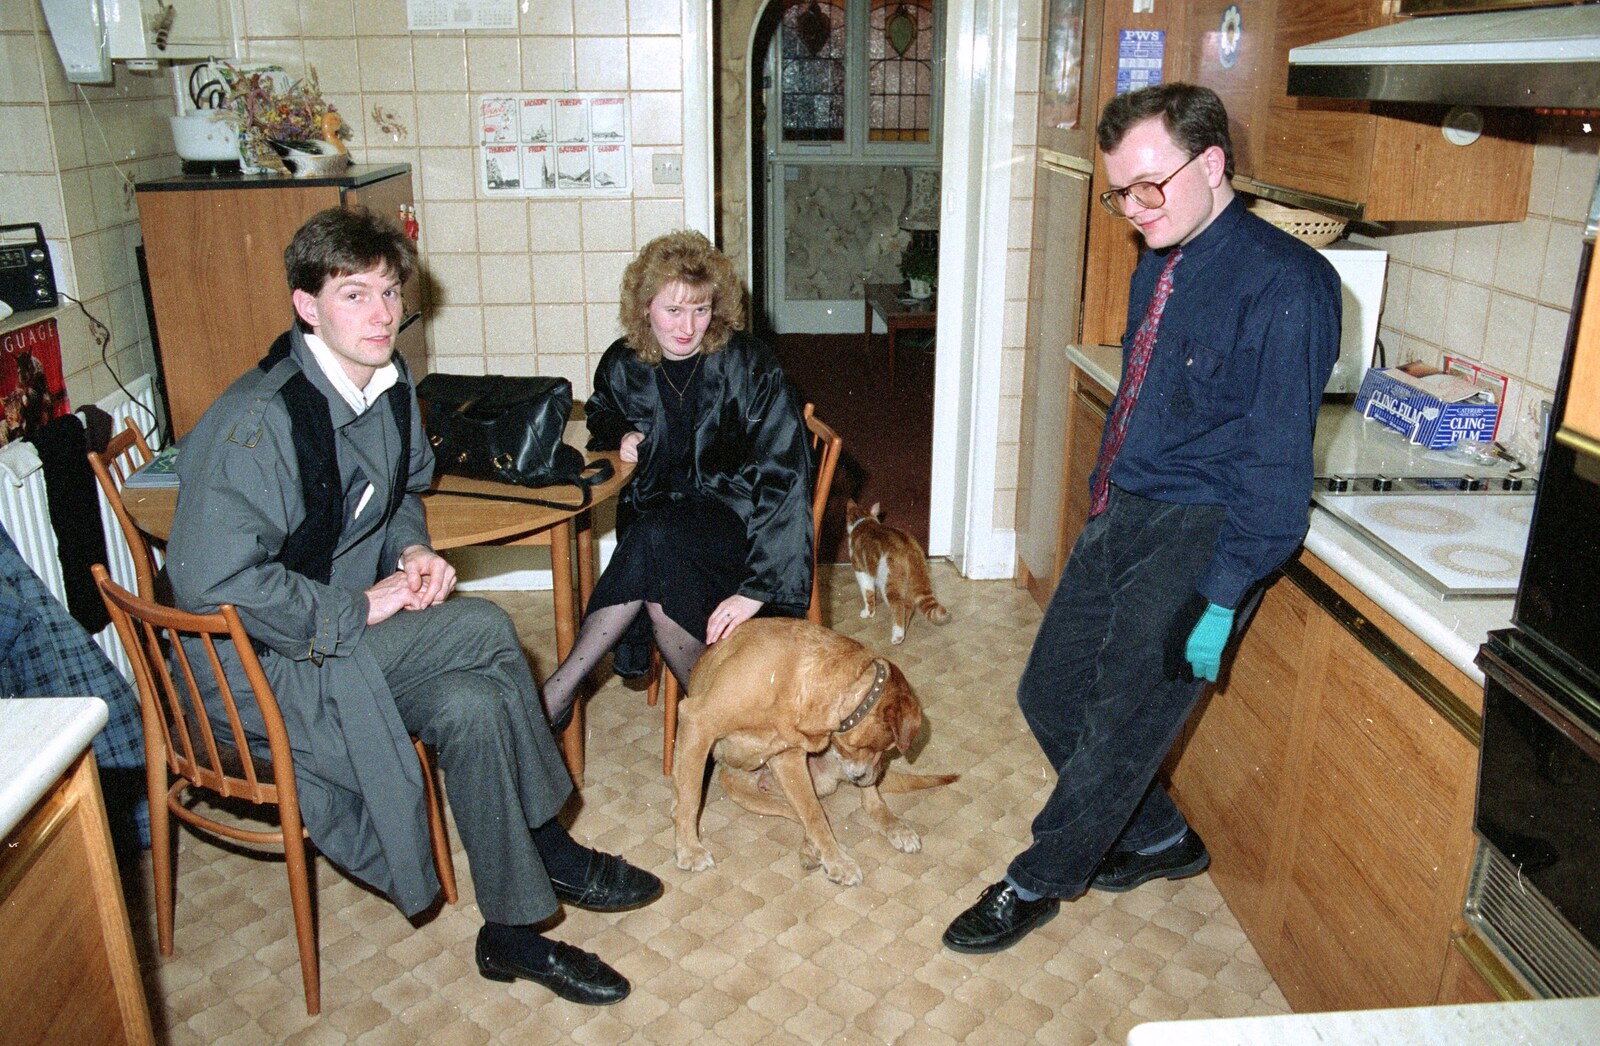 The Vineyard, Christchurch and Pizza, New Milton and the New Forest - 2nd April 1989: Sean, Maria and Hamish in Hamish's kitchen, waiting for pizza